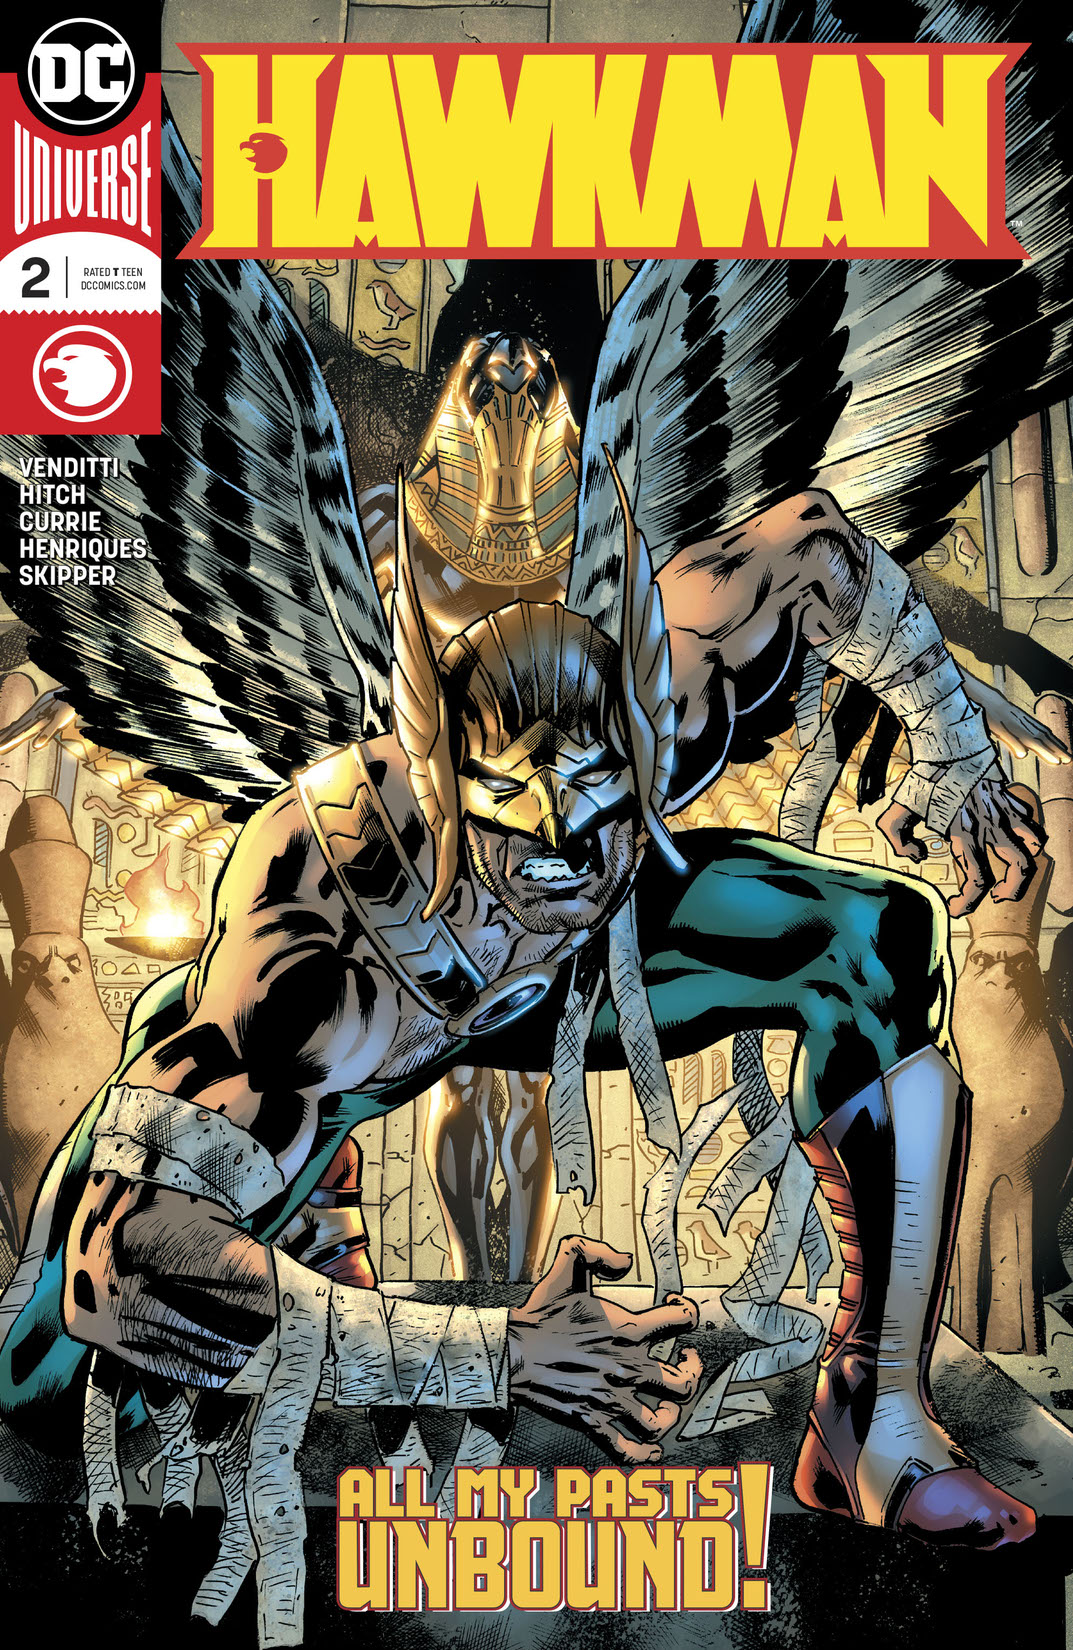 Hawkman (2018-) #2 preview images